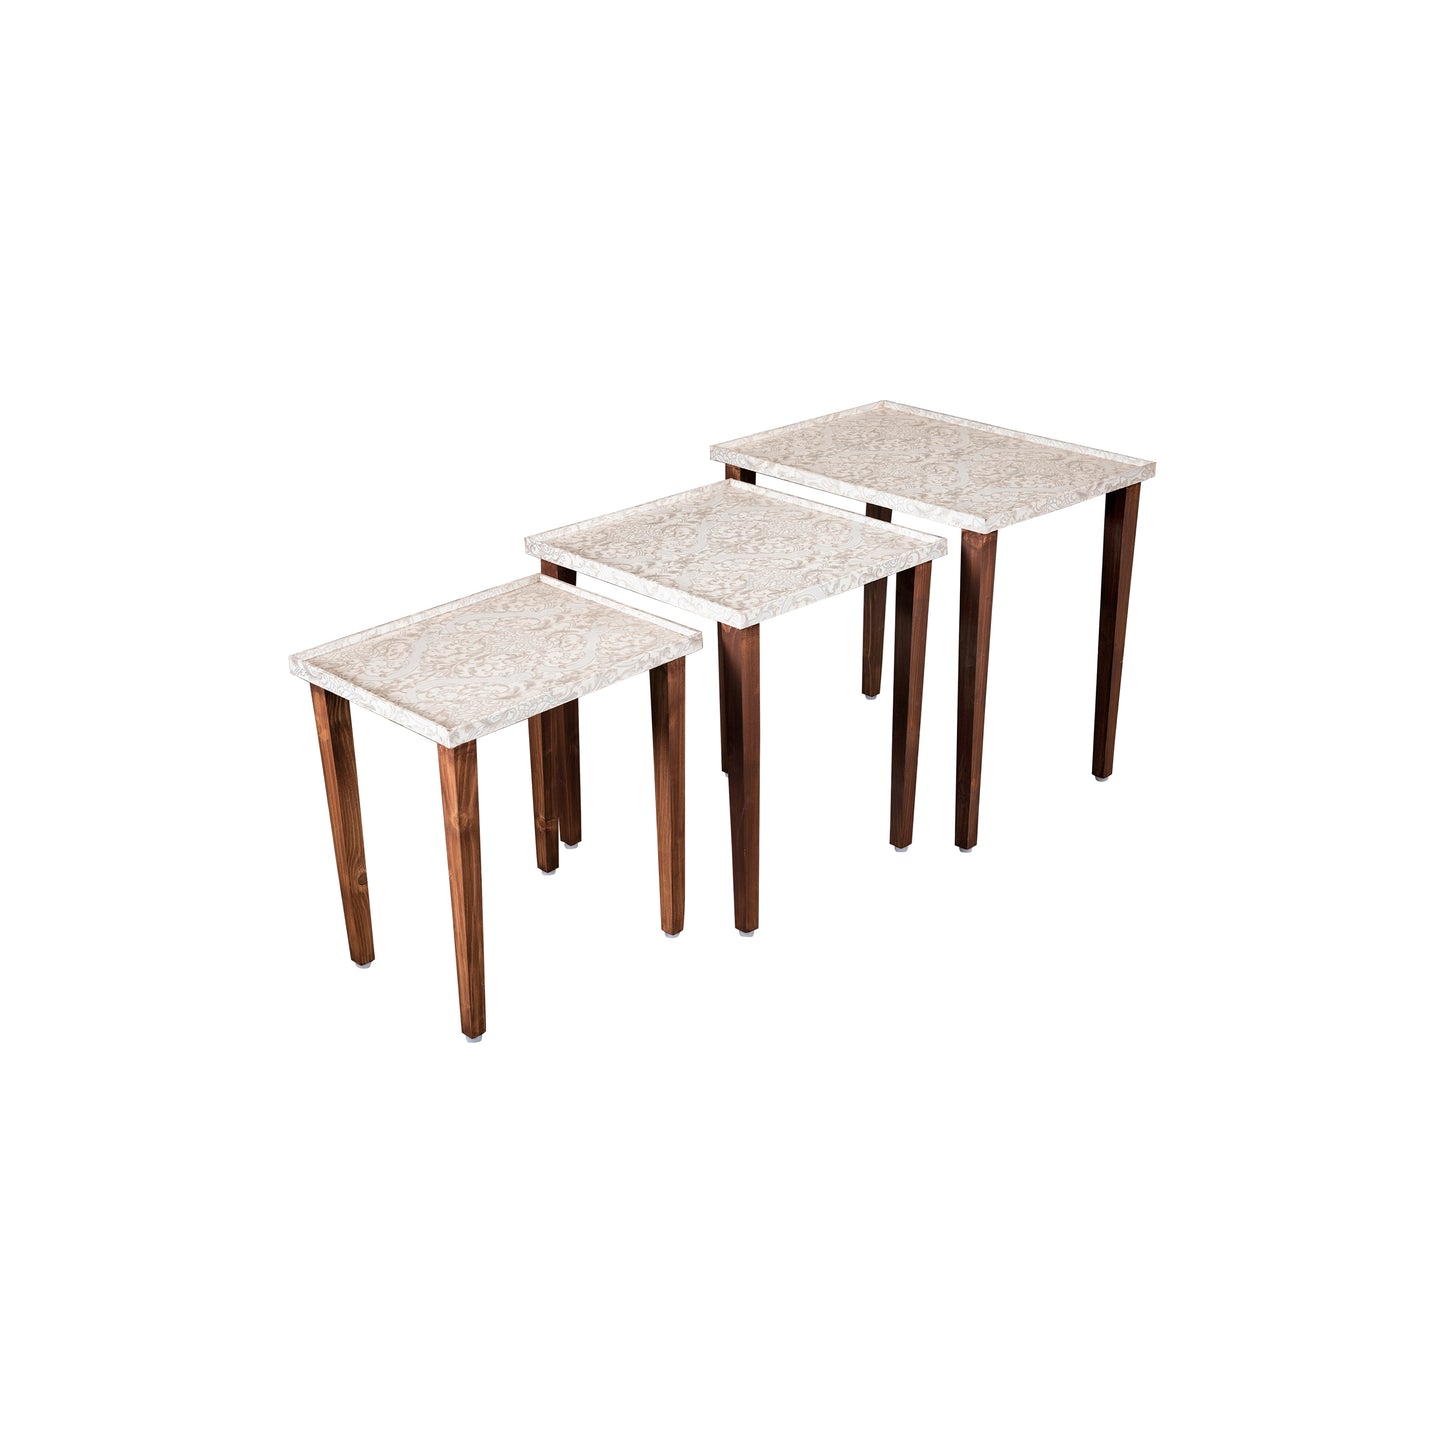 A Tiny Mistake Chantilly Wooden Rectangle Nesting Tables (Set of 3), Living Room Decor